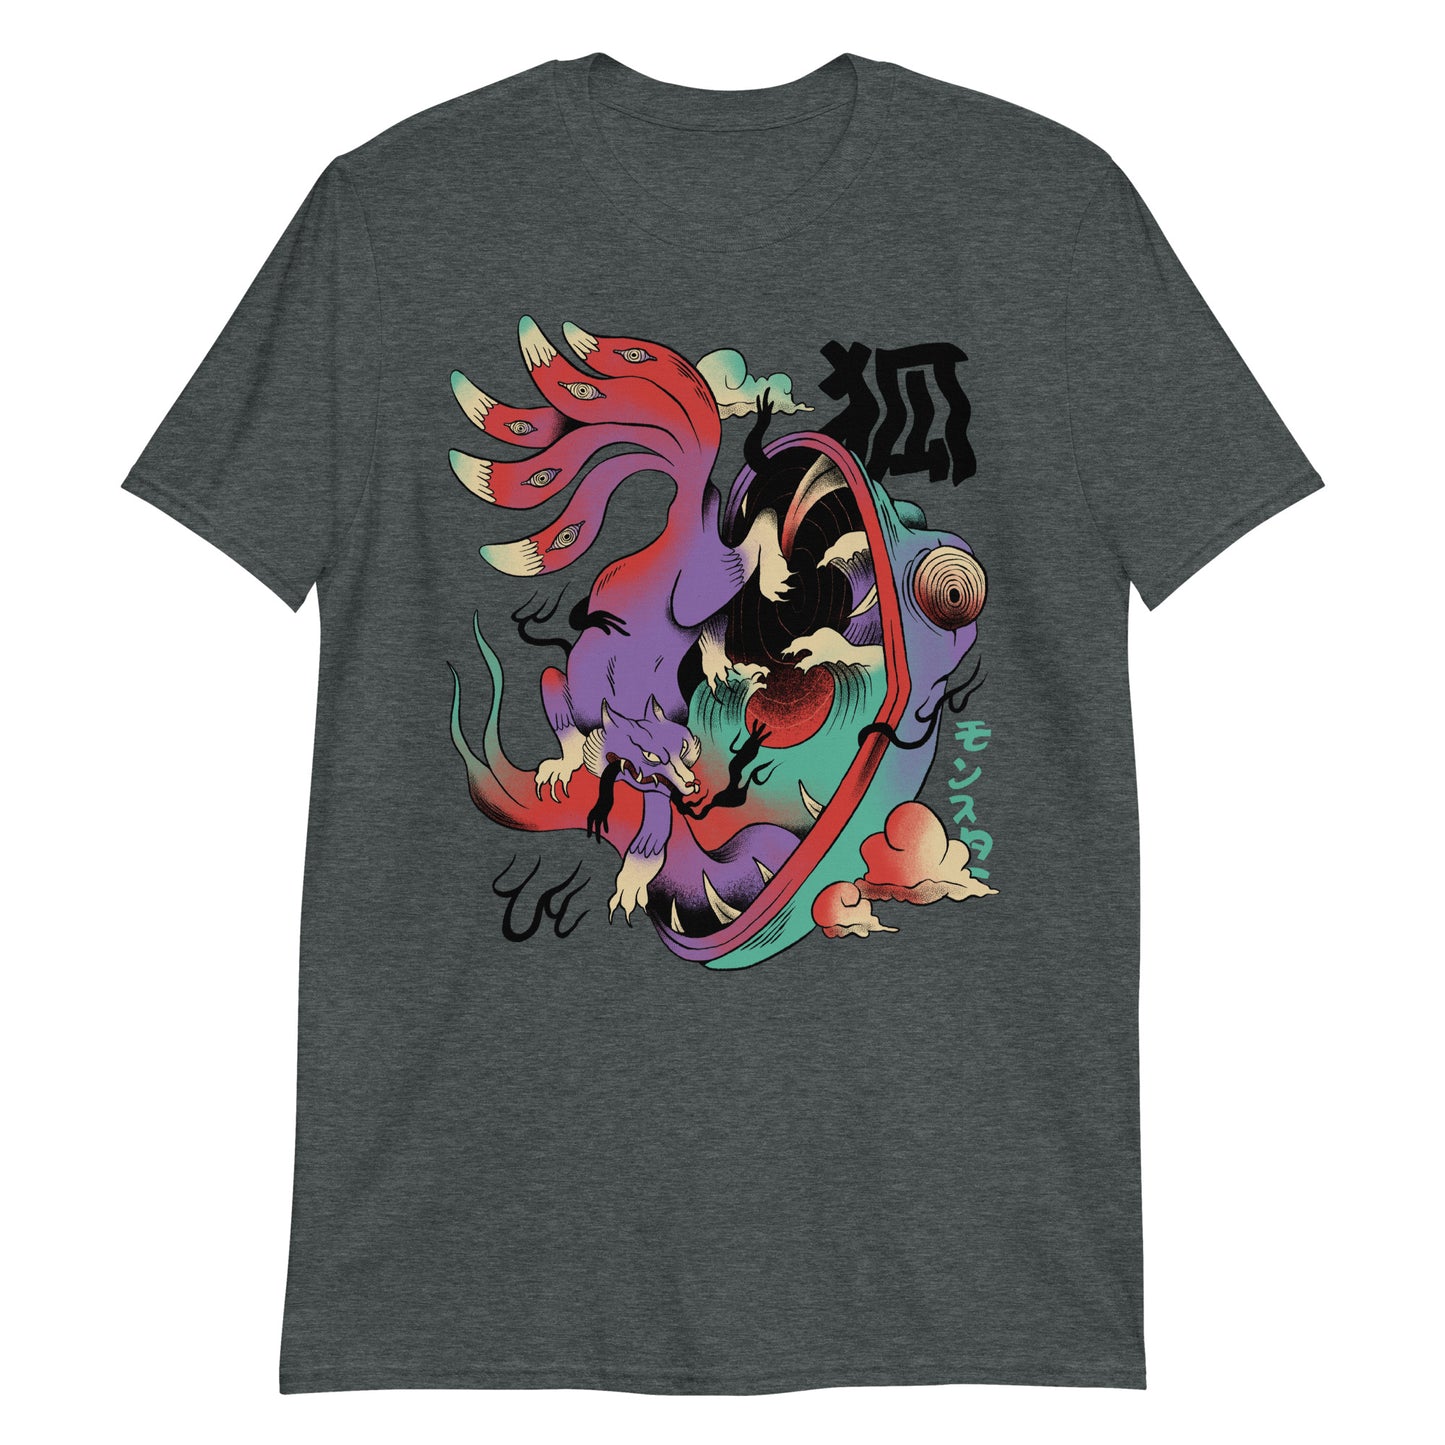 Psychedelic Japanese Aesthetic Art T-Shirt